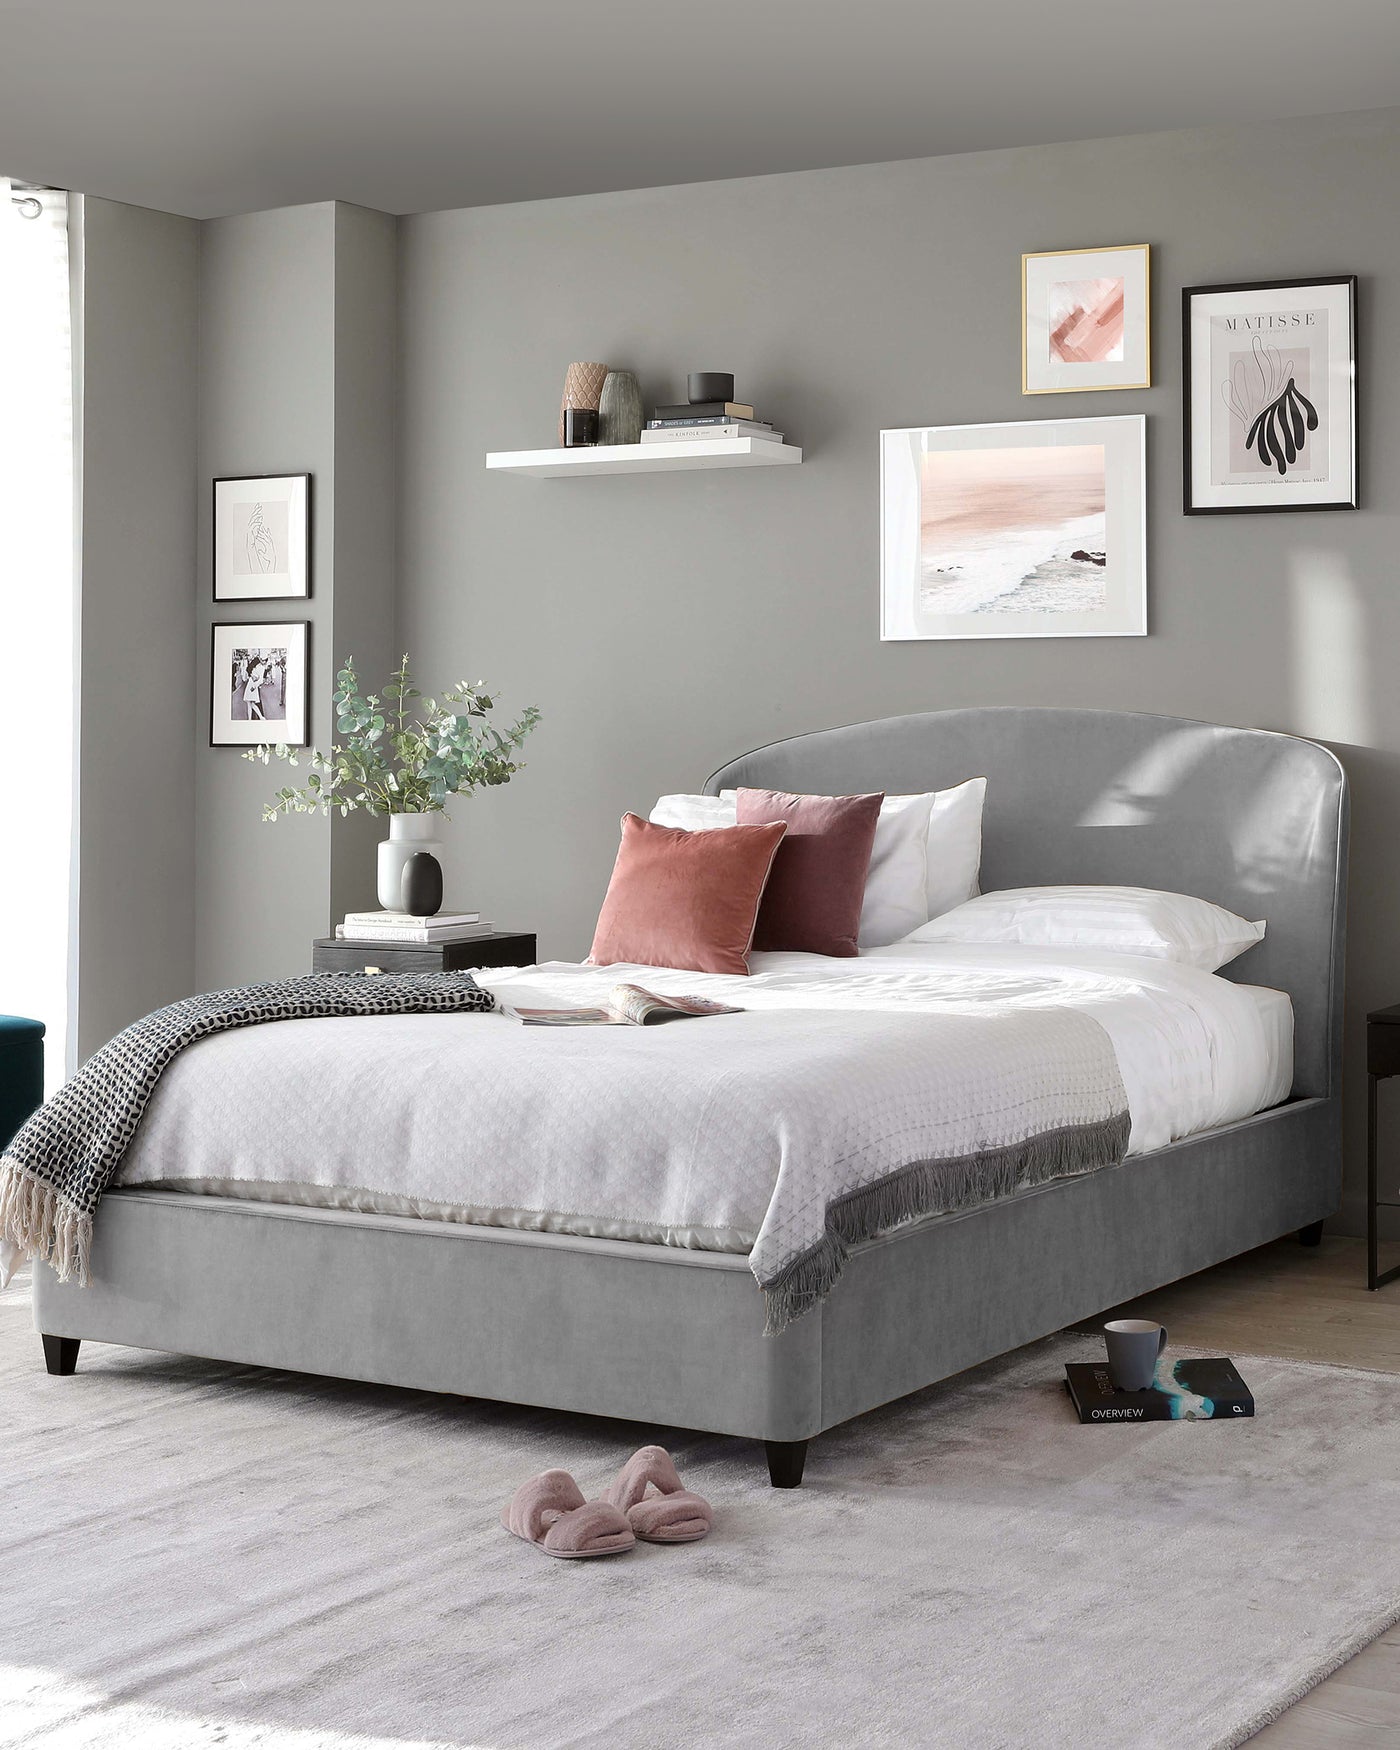 Elegant contemporary grey upholstered bed with wingback headboard design, featuring button tufting and low-profile footboard. A plush white and grey bedding set complements the bed.